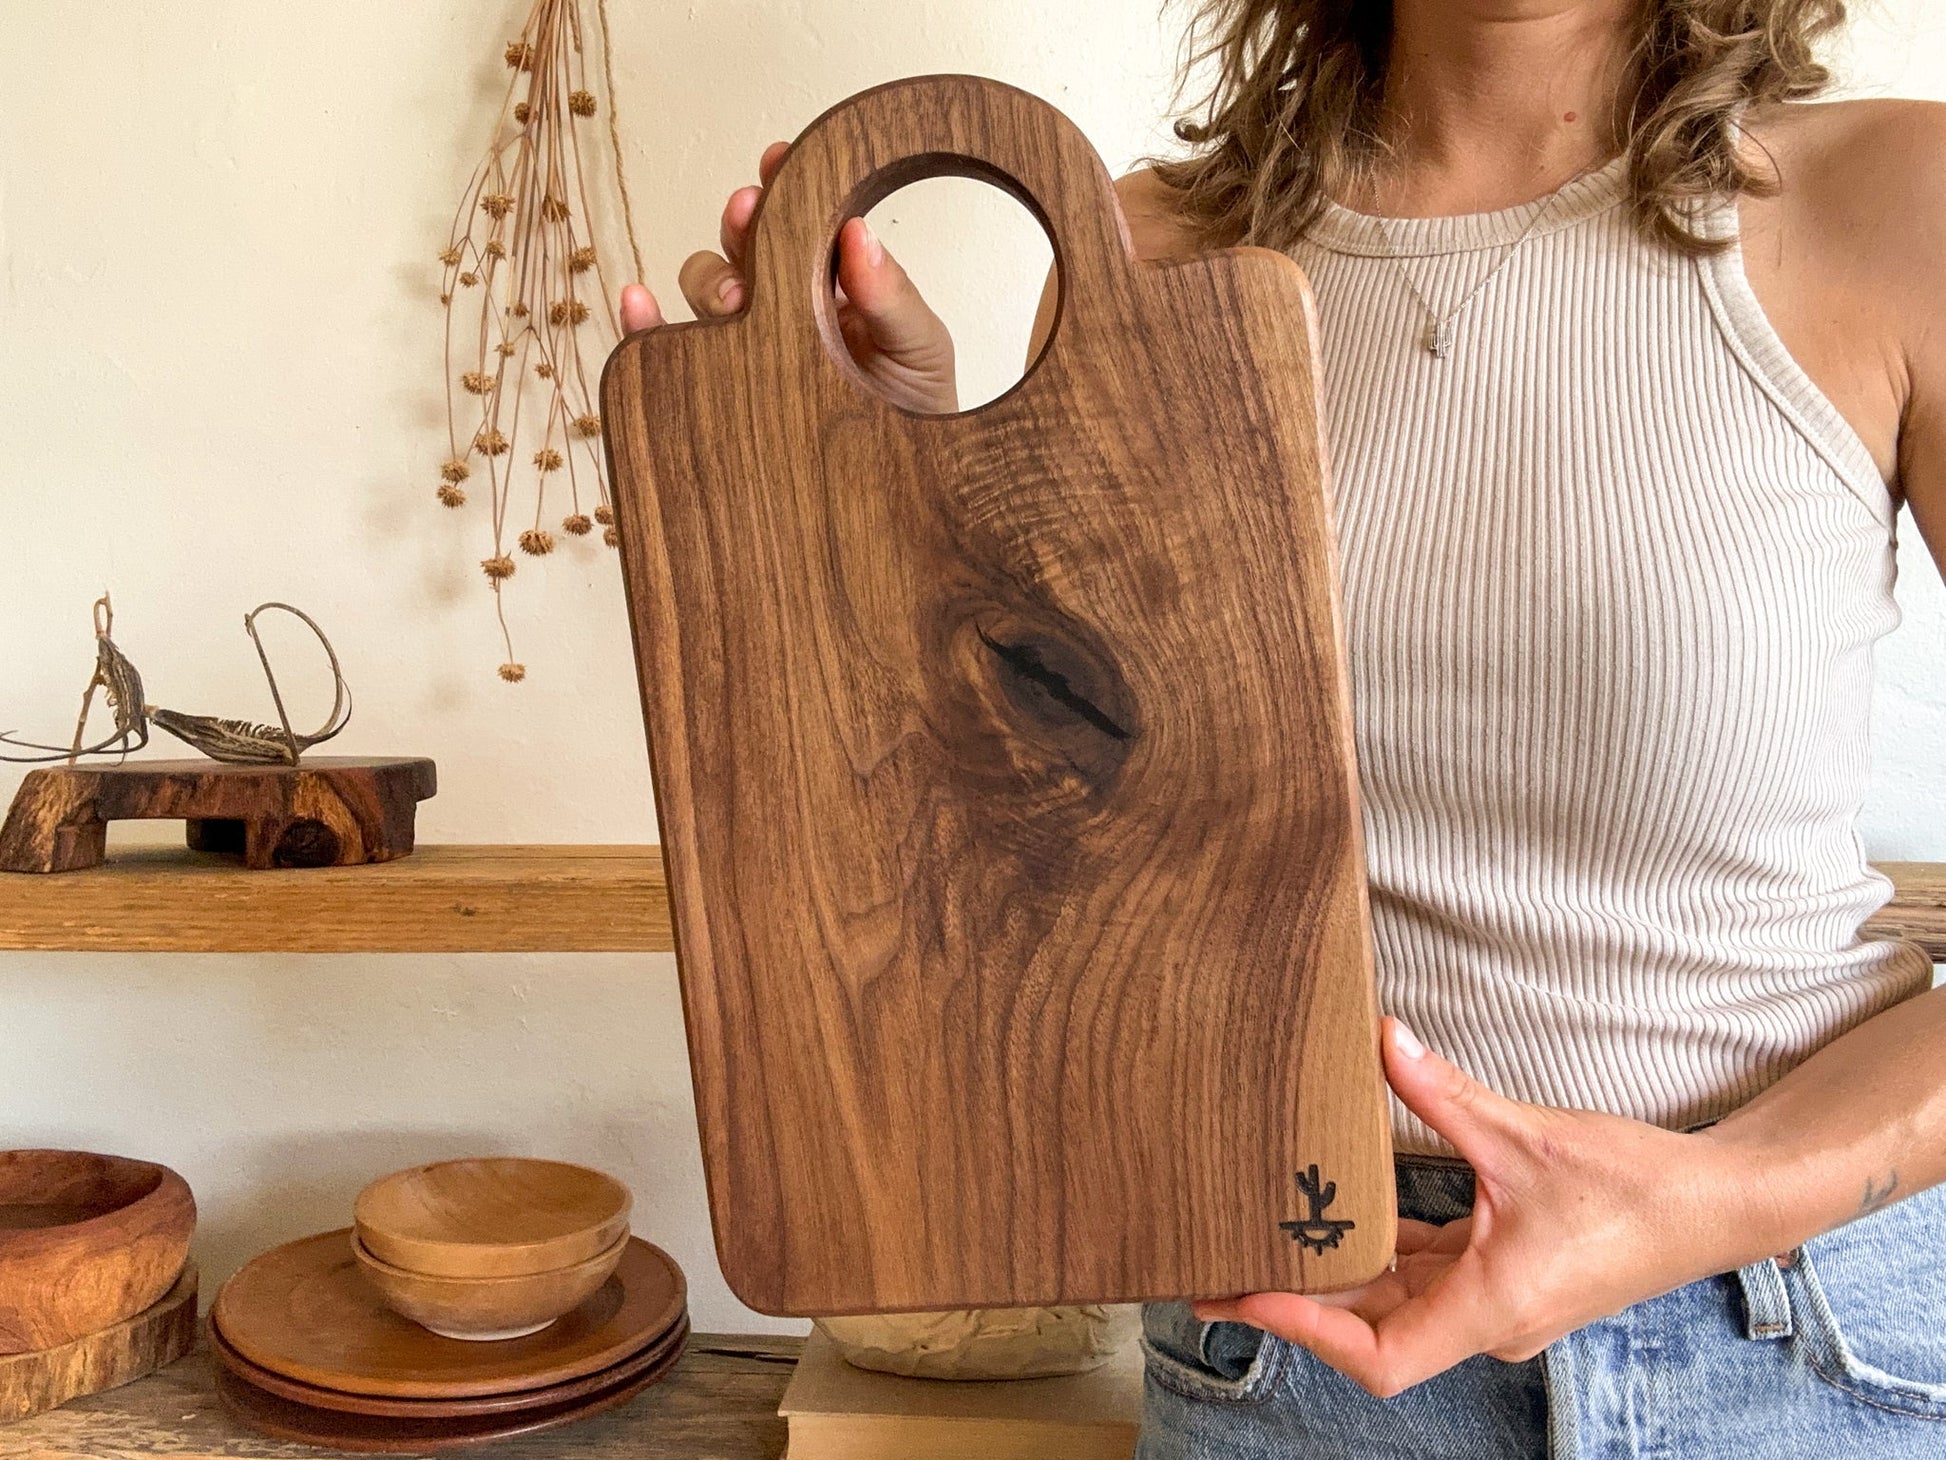 A modern design featuring a circular handle. These are made out of either hard maple that is know for its neutral grain and durable surface or dark walnut that is know for its moody grain with stripes of caramel. Great boards to grab for a quick chop or made as your designated home bar board for citrus.